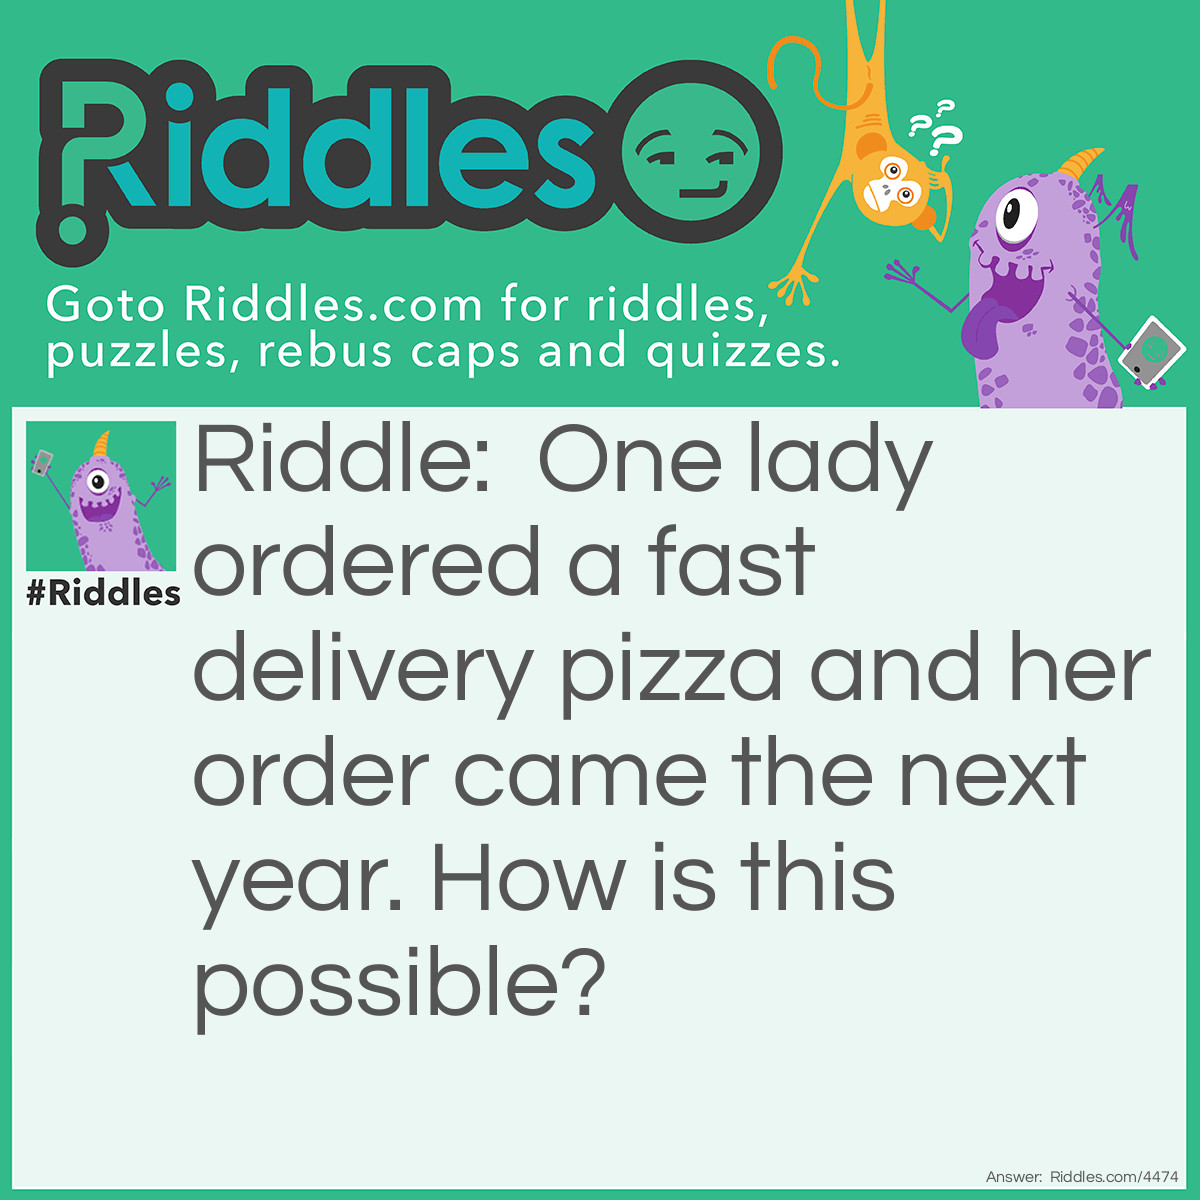 Riddle: One lady ordered a fast delivery pizza and her order came the next year. How is this possible? Answer: She ordered the pizza for New Years Day.